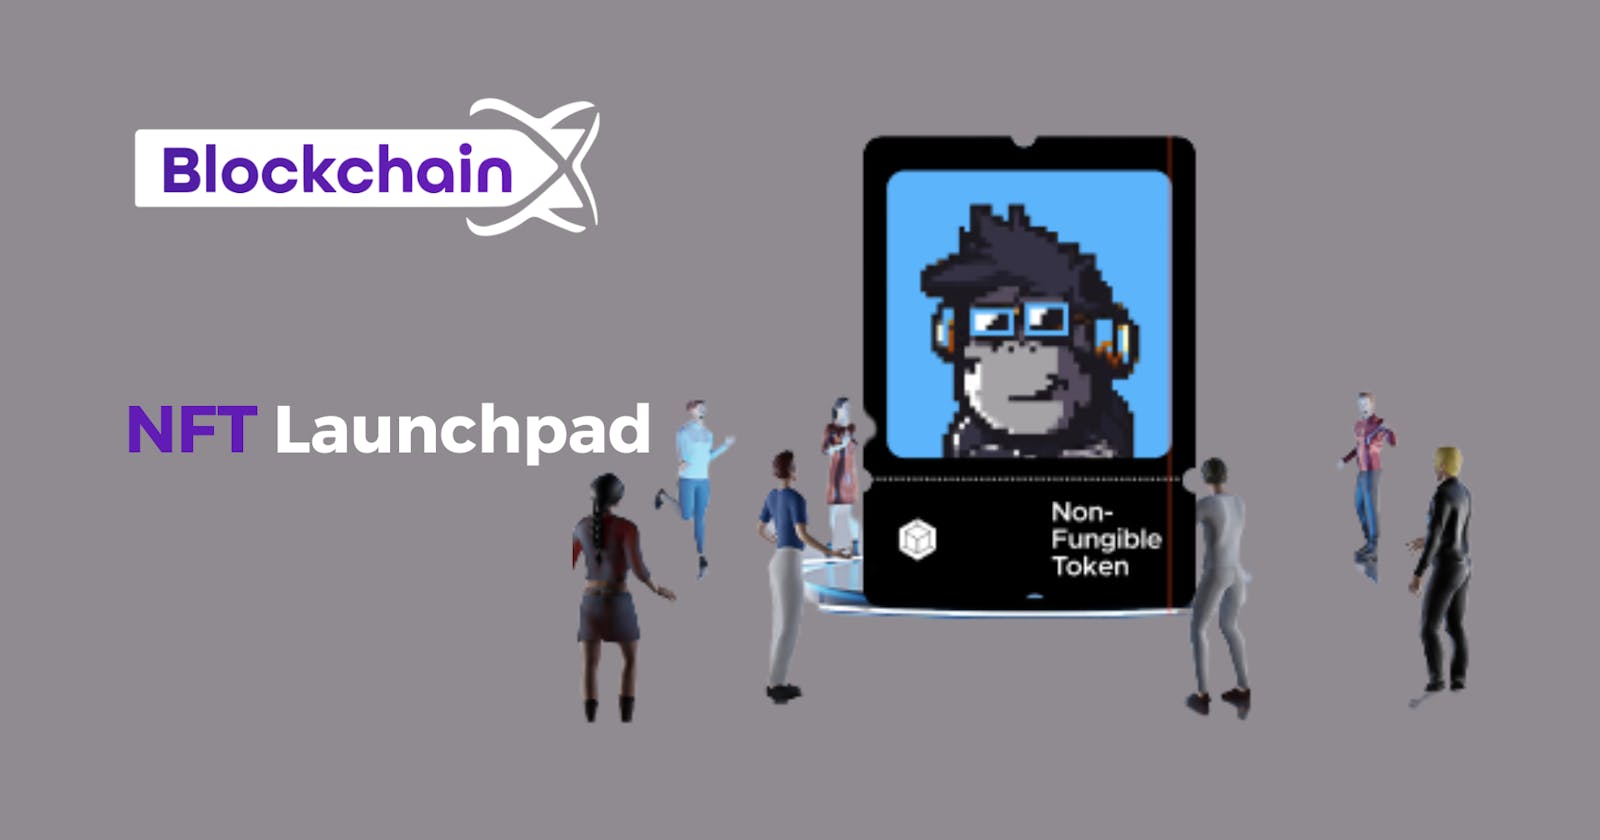 What role does a launchpad for NFT play in the crypto ecosystem?